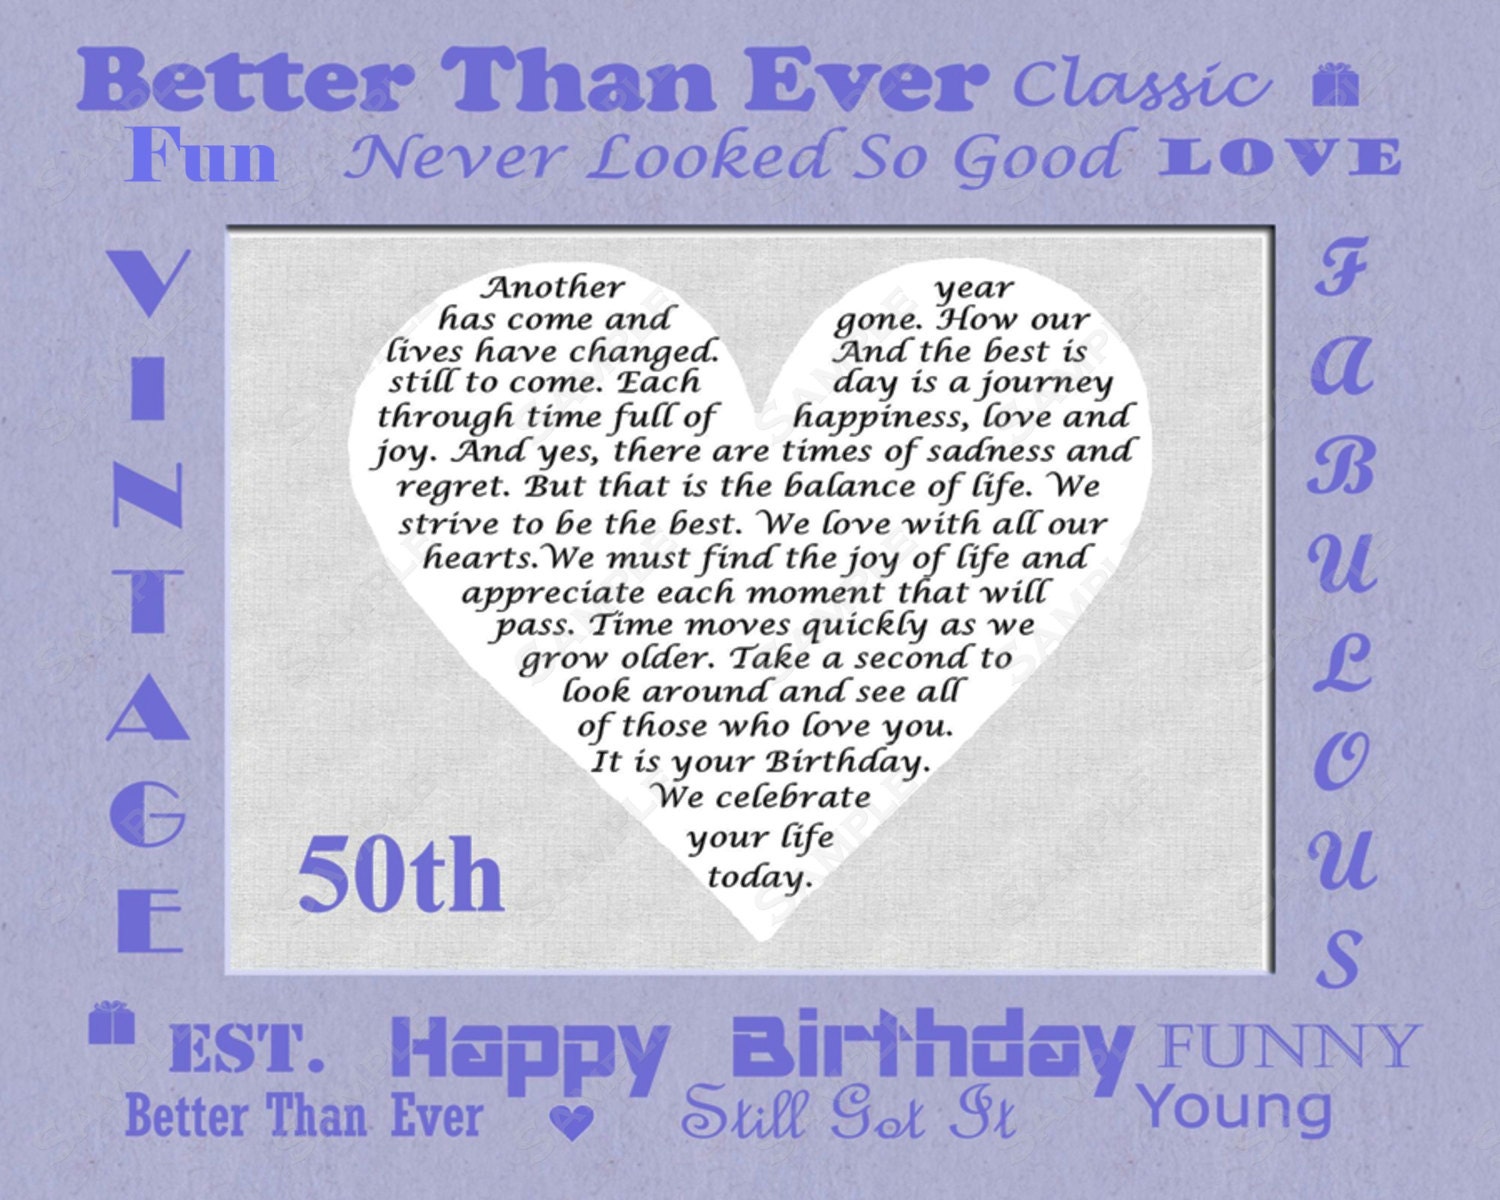 50th-birthday-gift-poem-8-x-10-by-queenofheartgifts-on-etsy